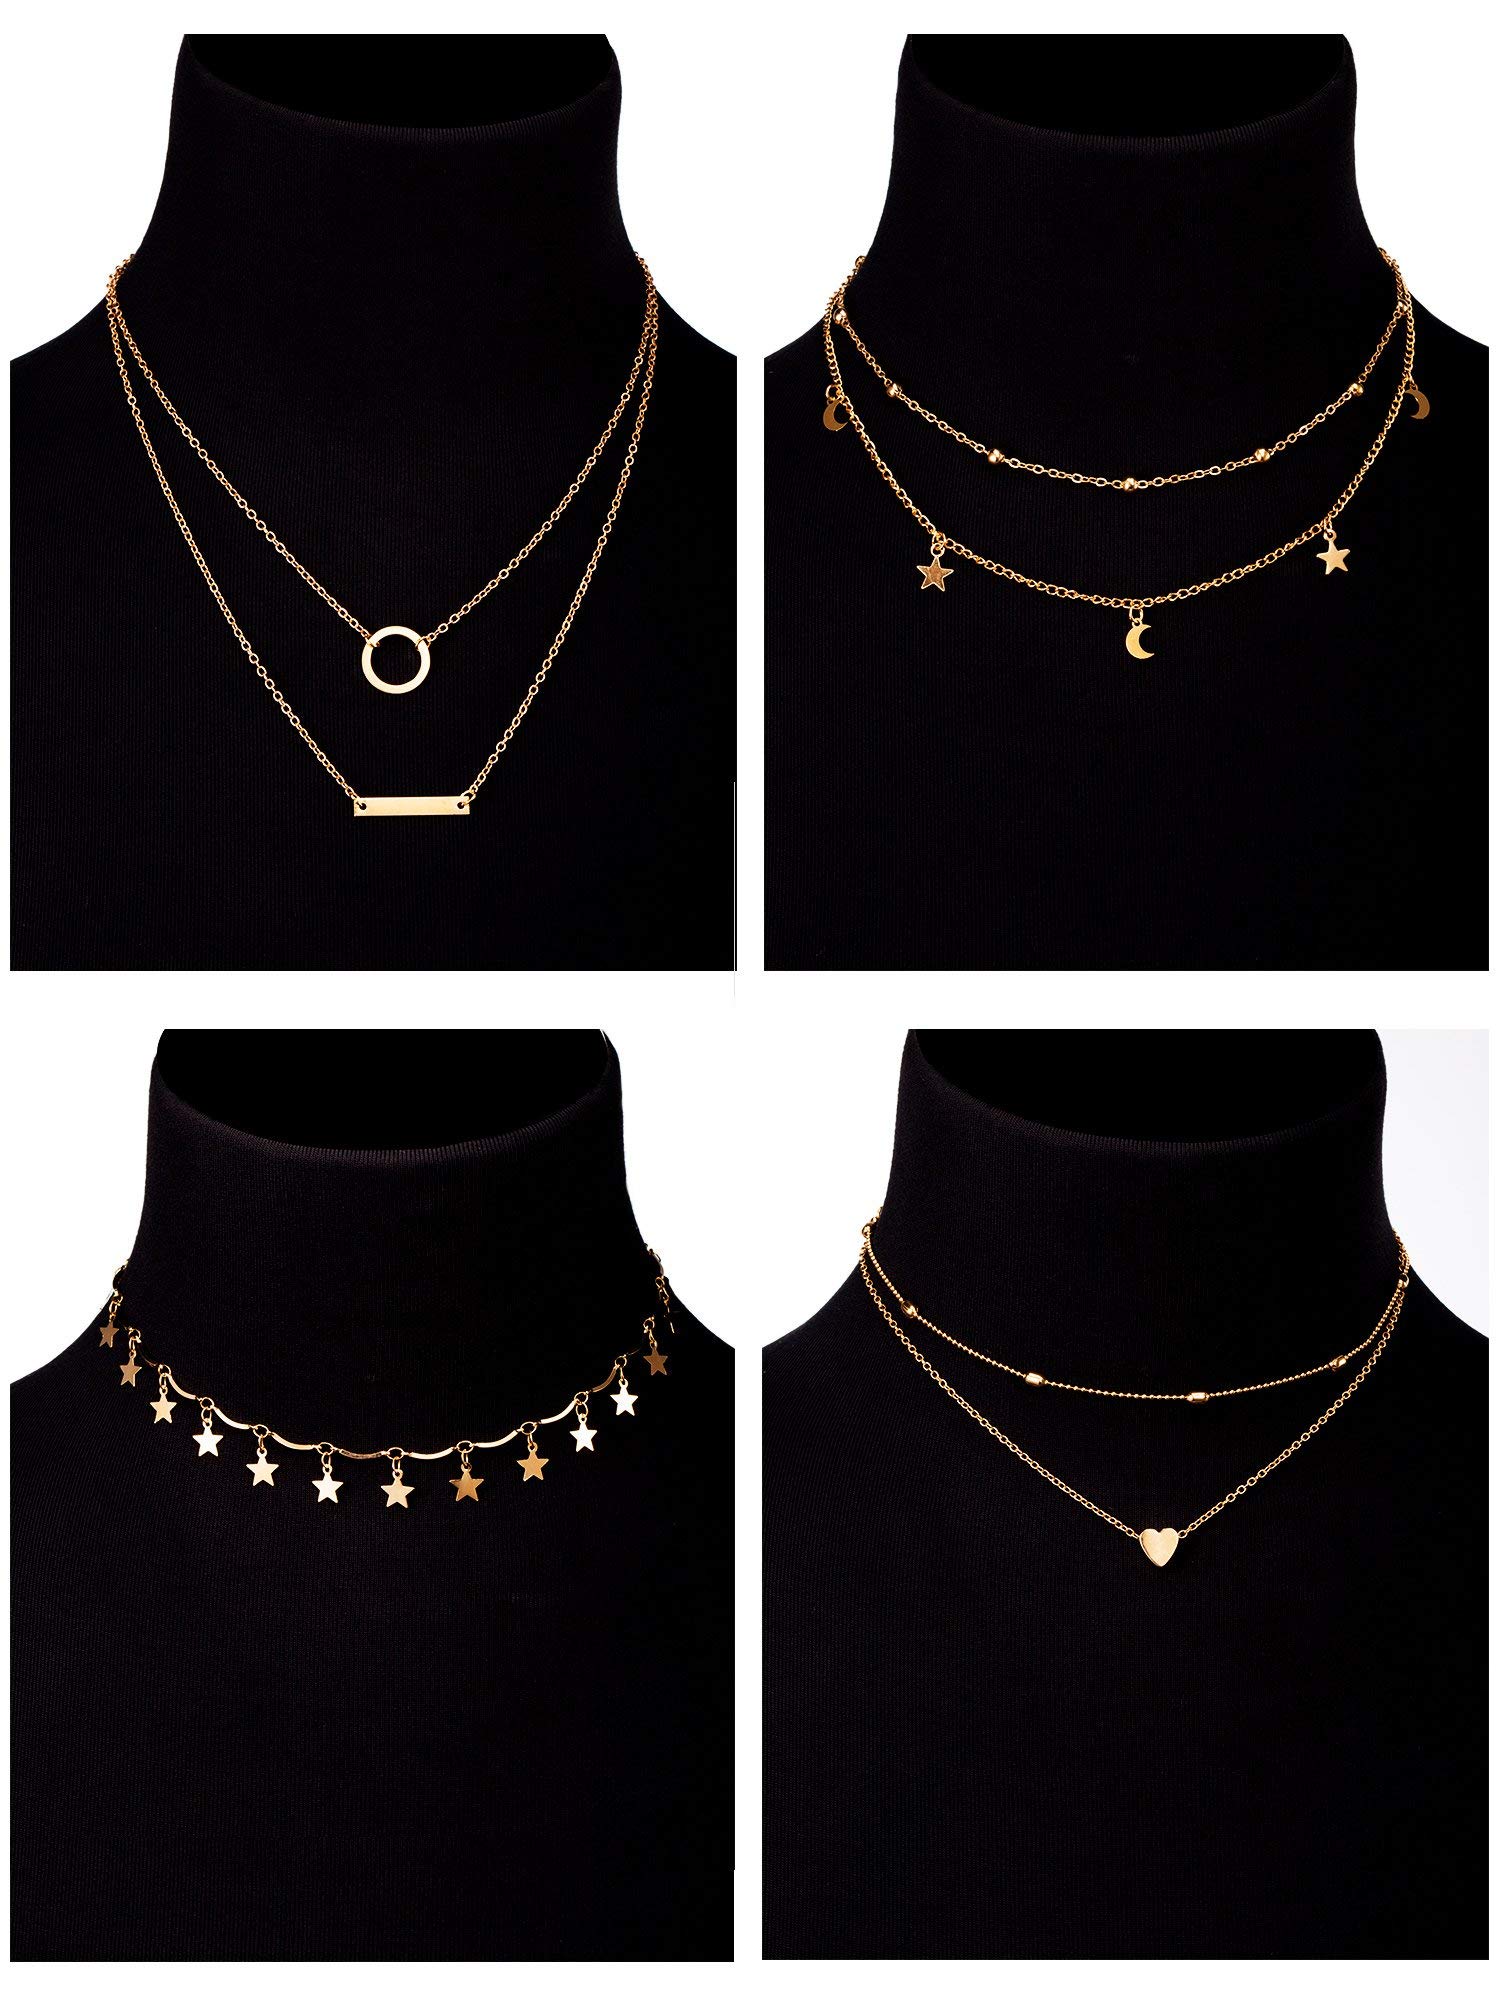 BBTO 9 Pieces Gold Layering Chain Choker Necklace Layered Pendant Statement Necklace for Women Girls (Style A)